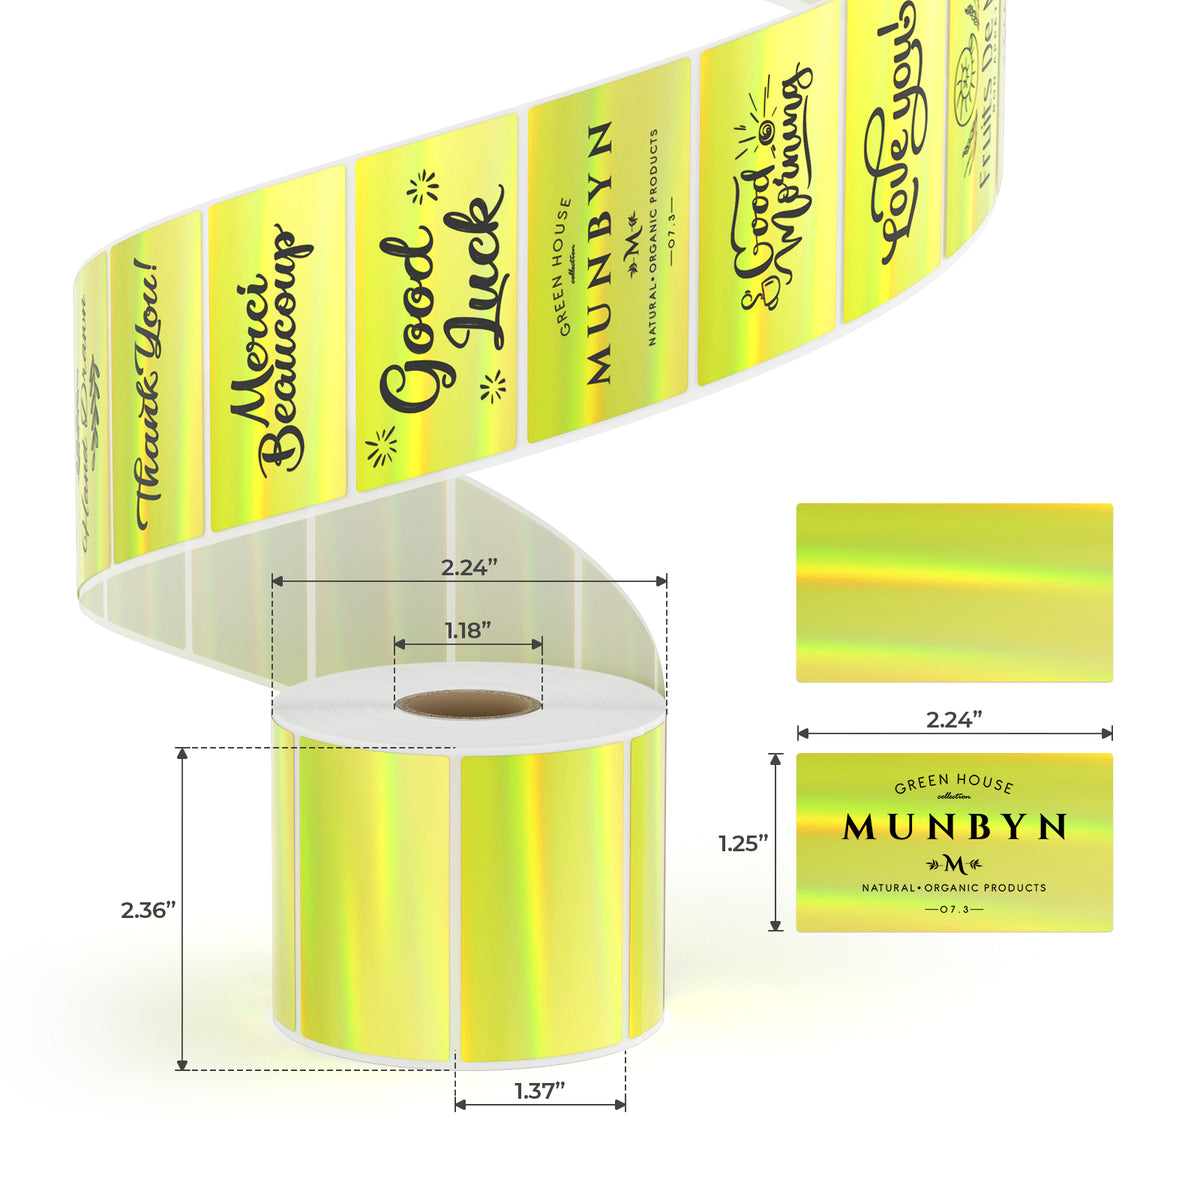 MUNBYN rectangular gold holographic thermal labels come with 250 labels per roll, offering a generous supply for your projects or business needs.